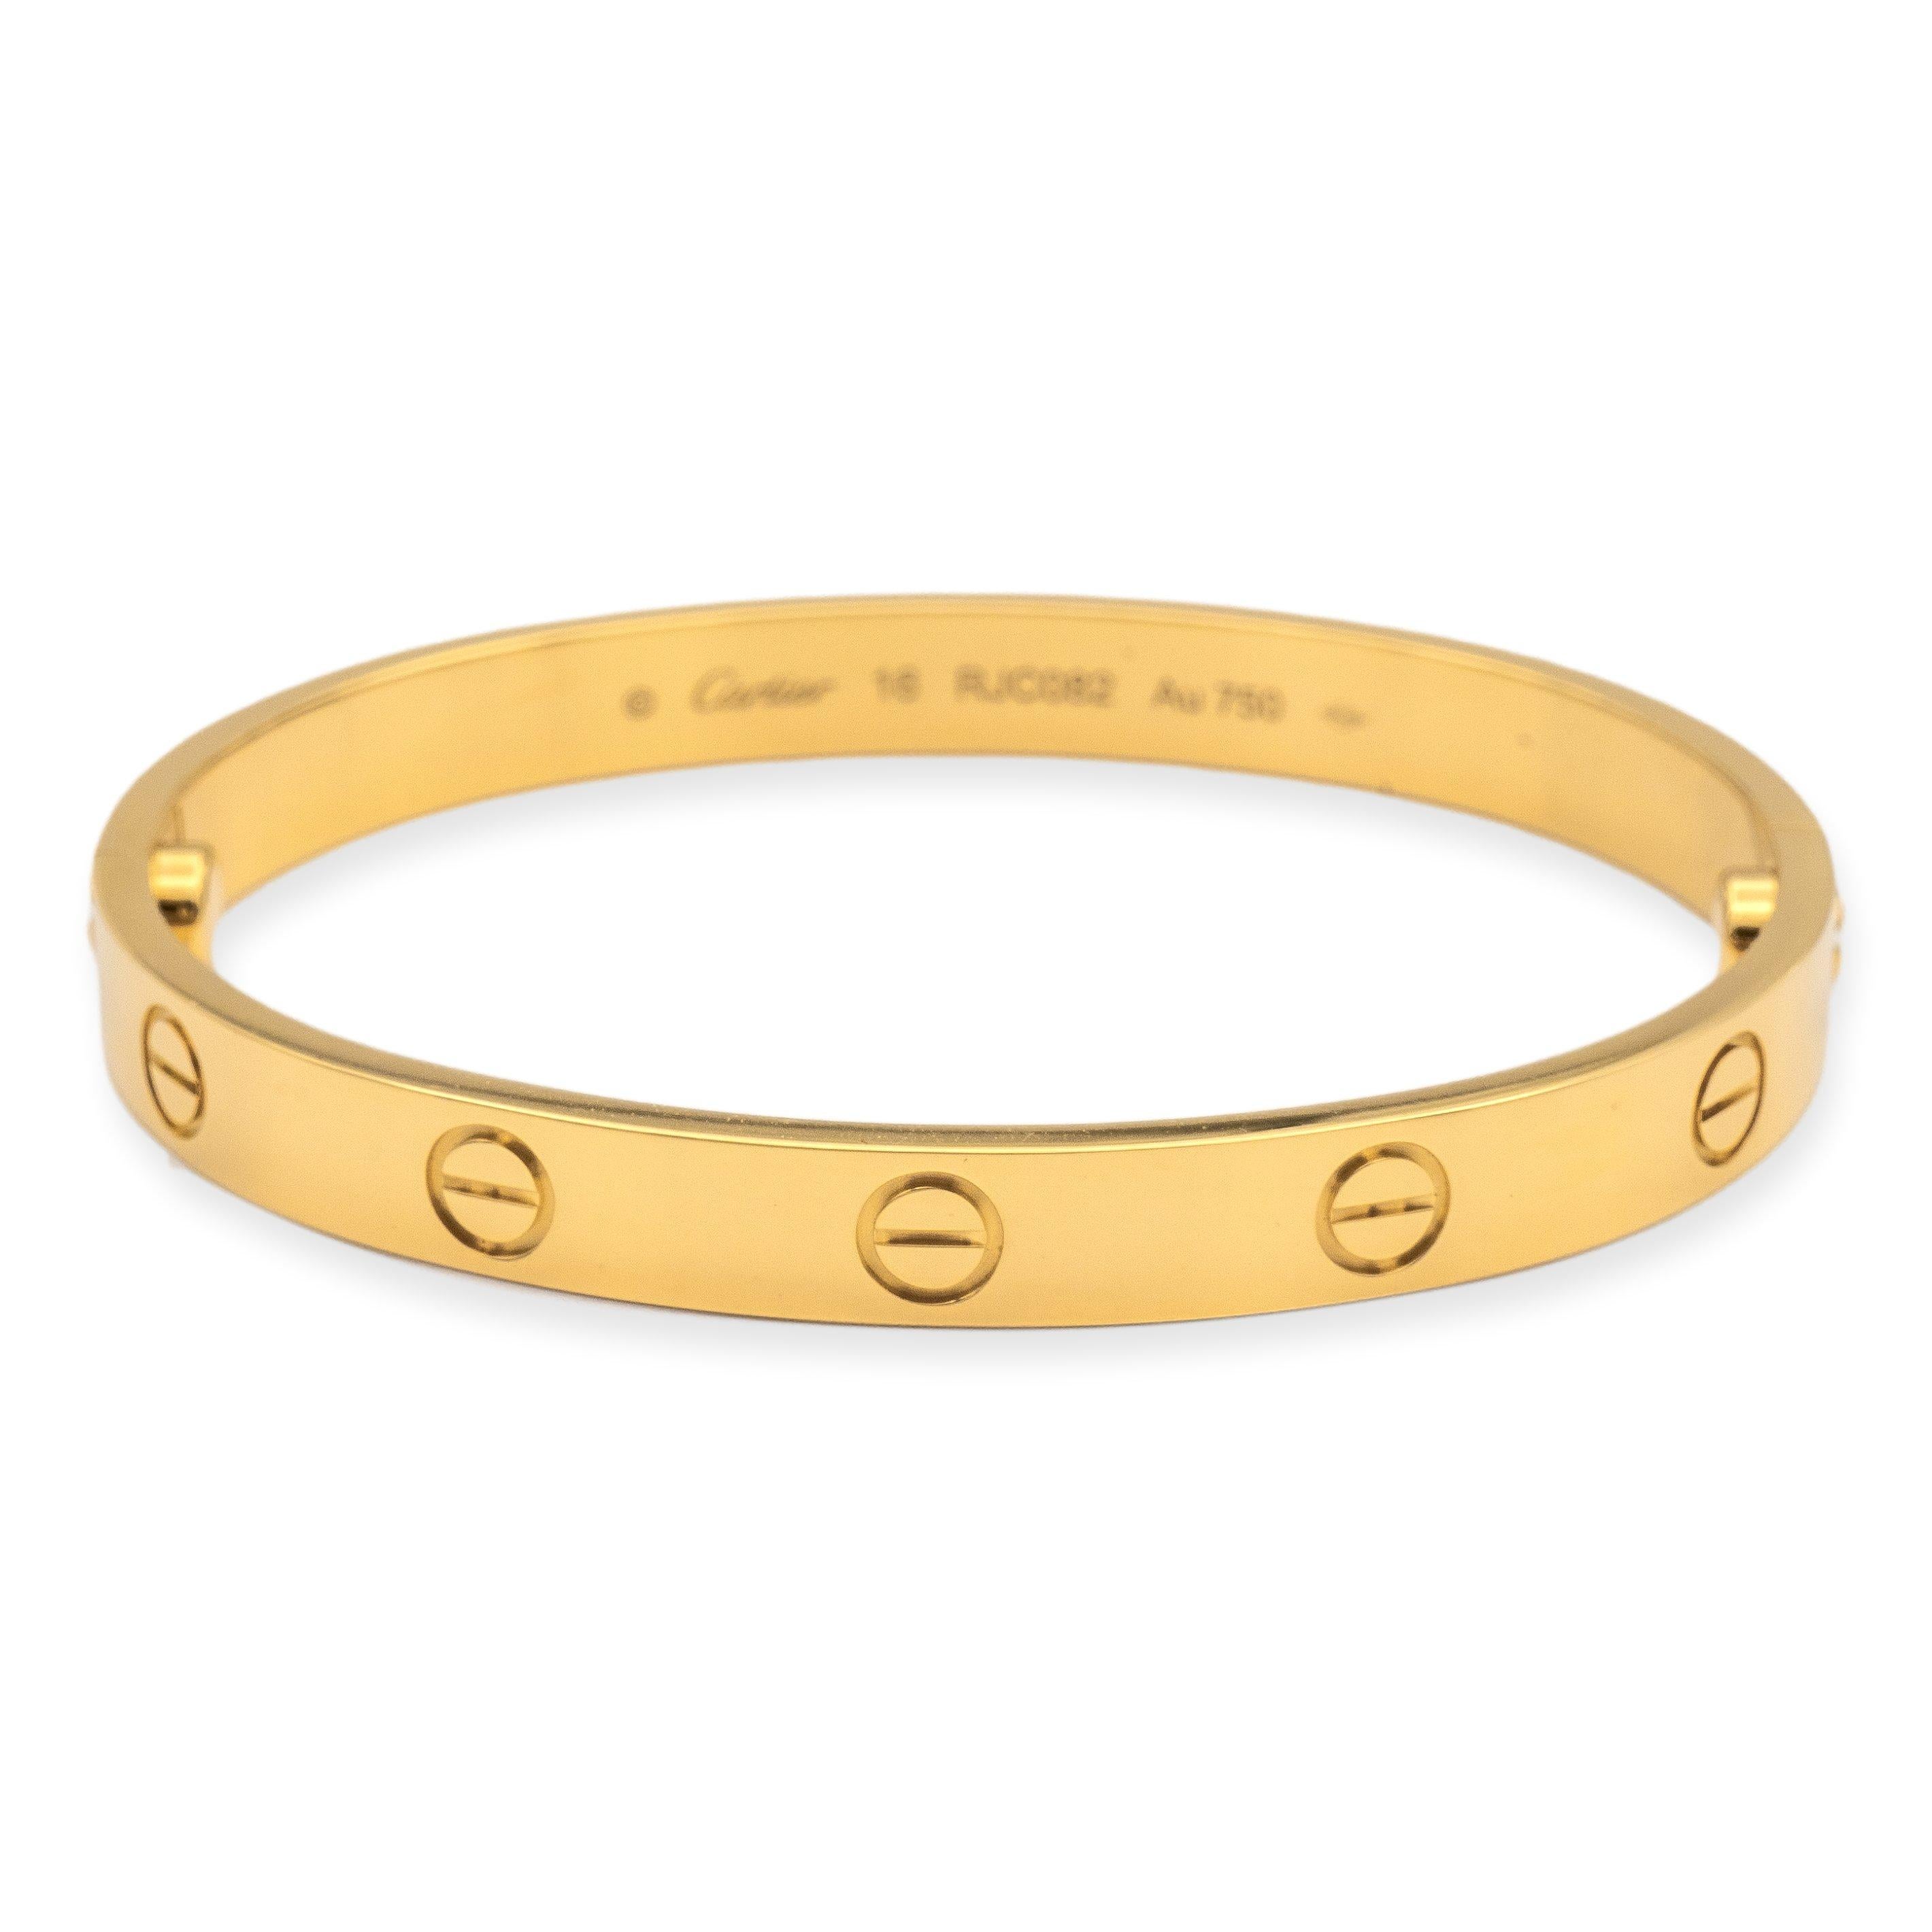 Cartier bangle bracelet from the iconic Love collection finely crafted in 18 karat yellow gold featuring screw motifs all the way around in a size 16. The closure is designed with two screws placed on either side of the bracelet.  Bracelet is fully